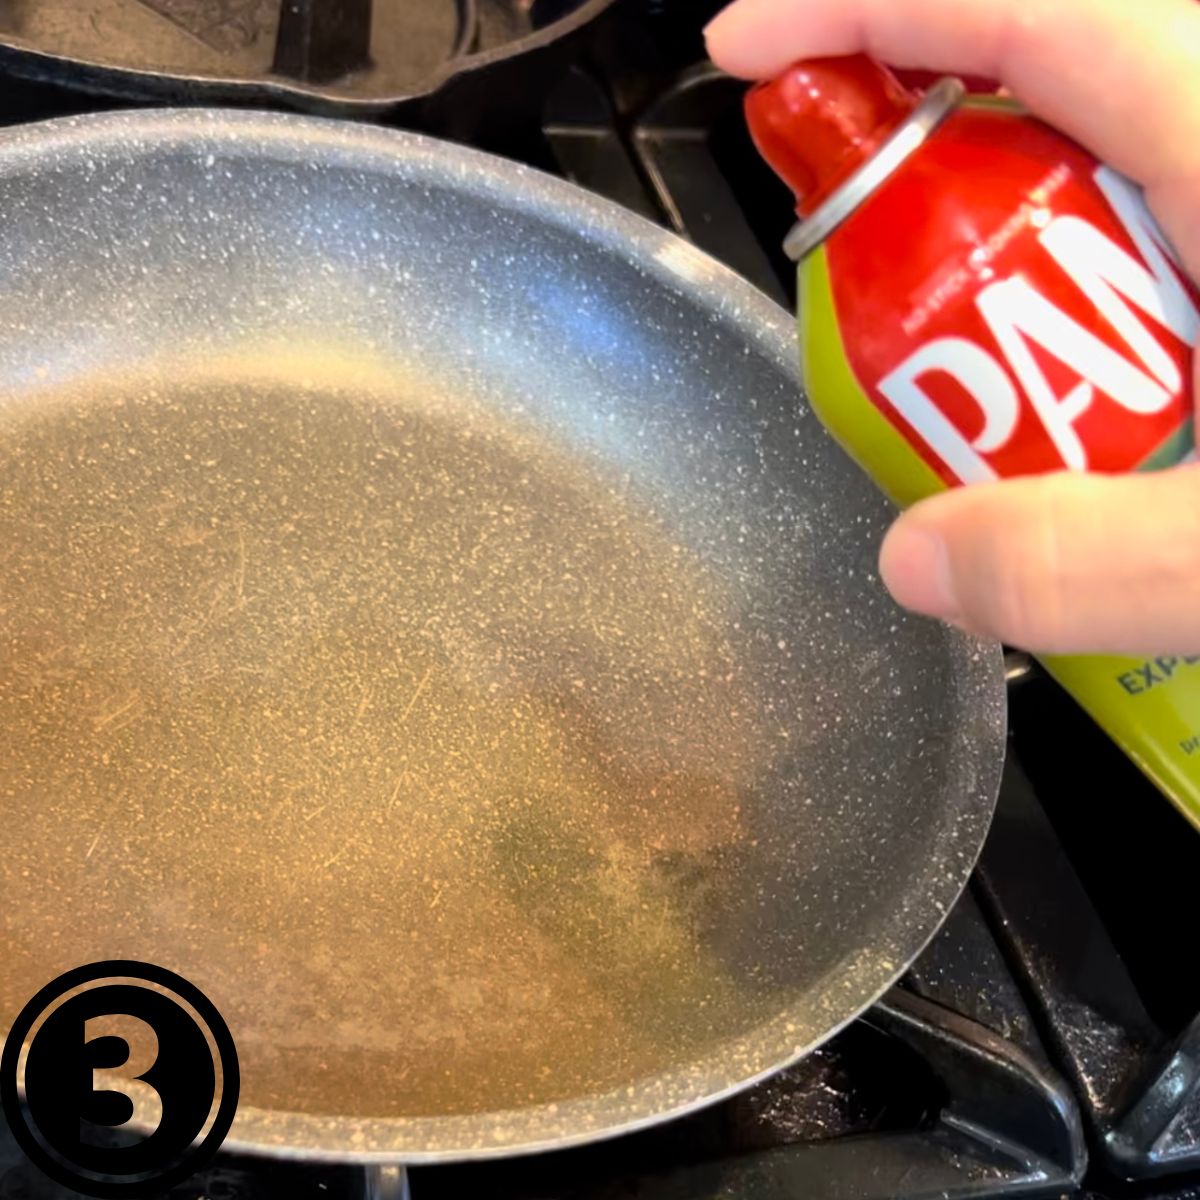 A hand holding a can of PAM spray olive oil over a frying pan